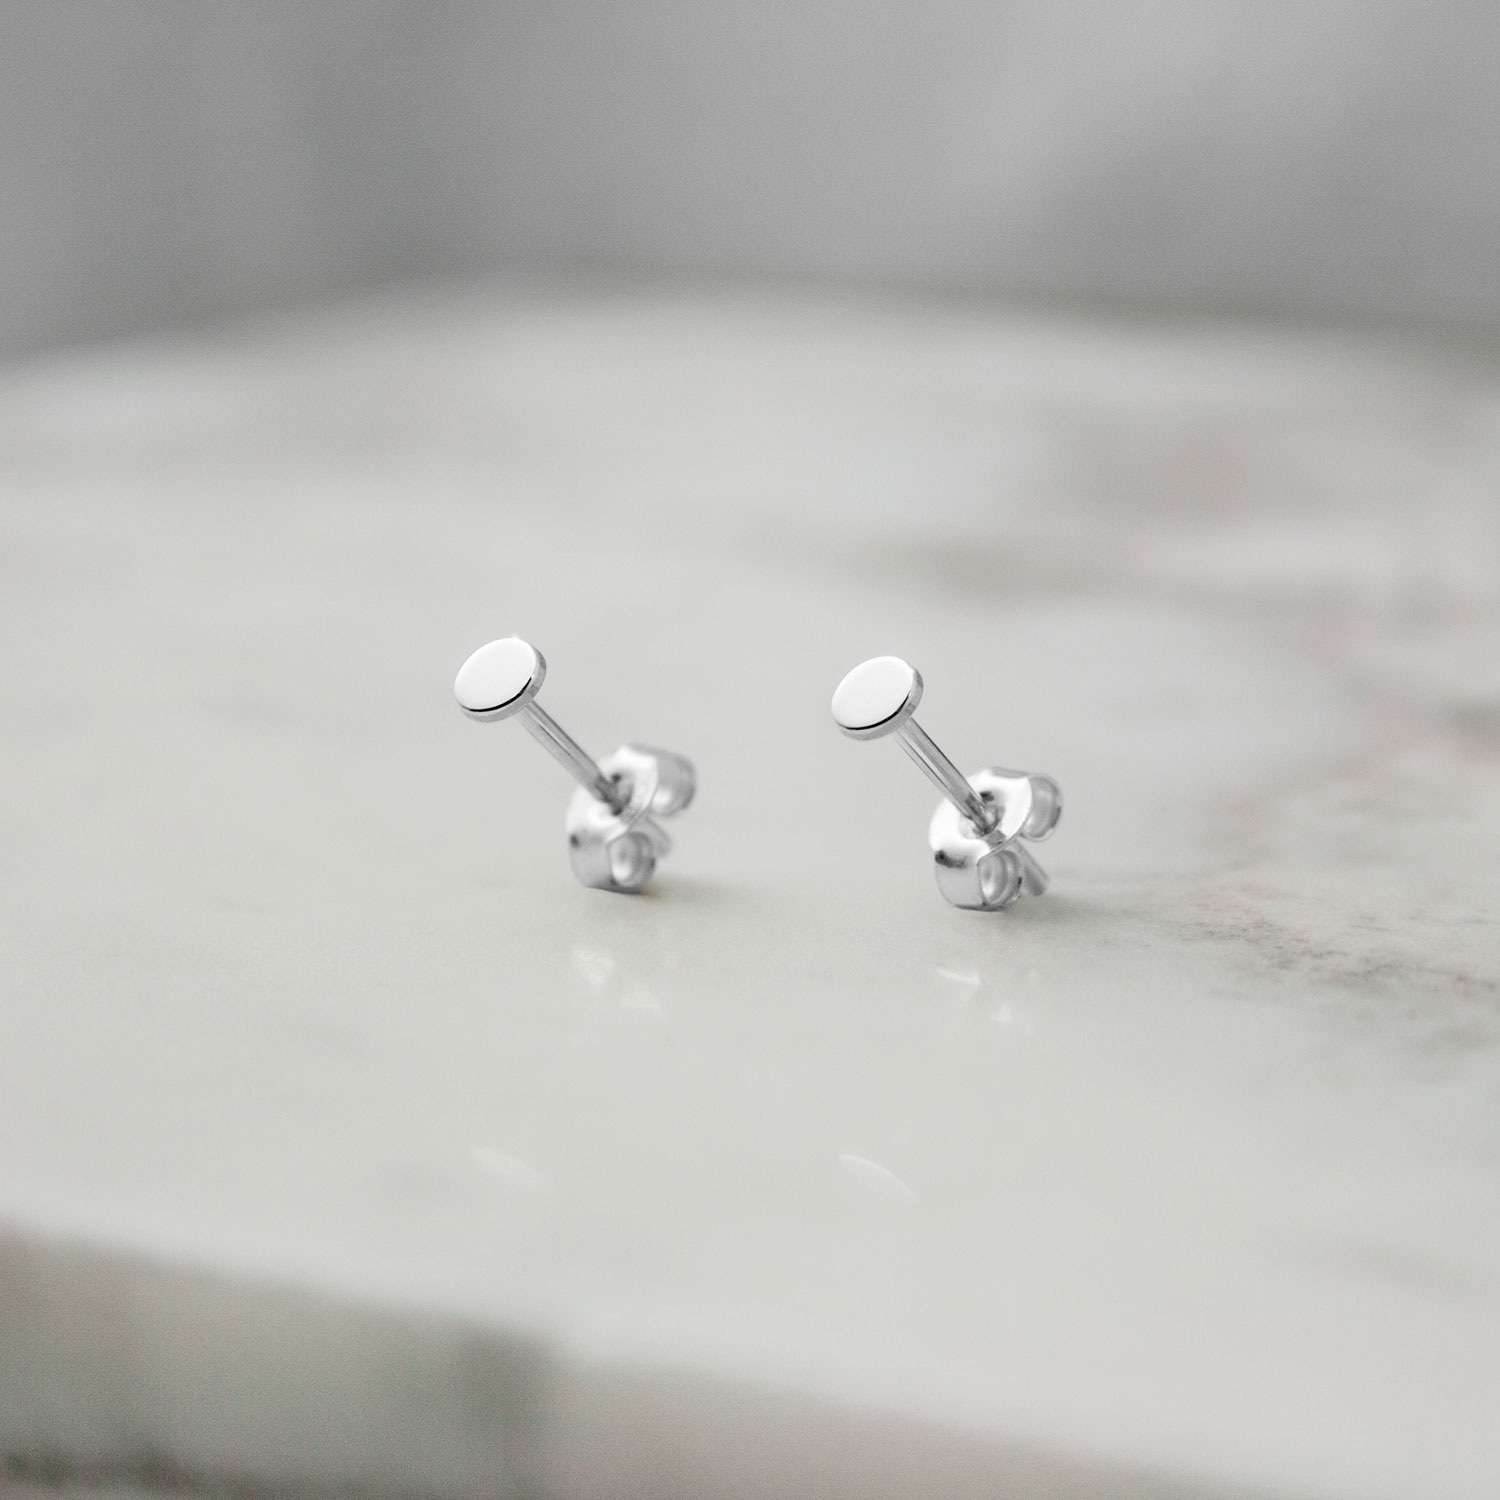 Buy FANCIME Solid 14K White Gold Tiny Bar Small Studs Everyday Minimalist Stud  Earrings Dainty Delicate Fine Jewelry For Women Girls at Amazon.in